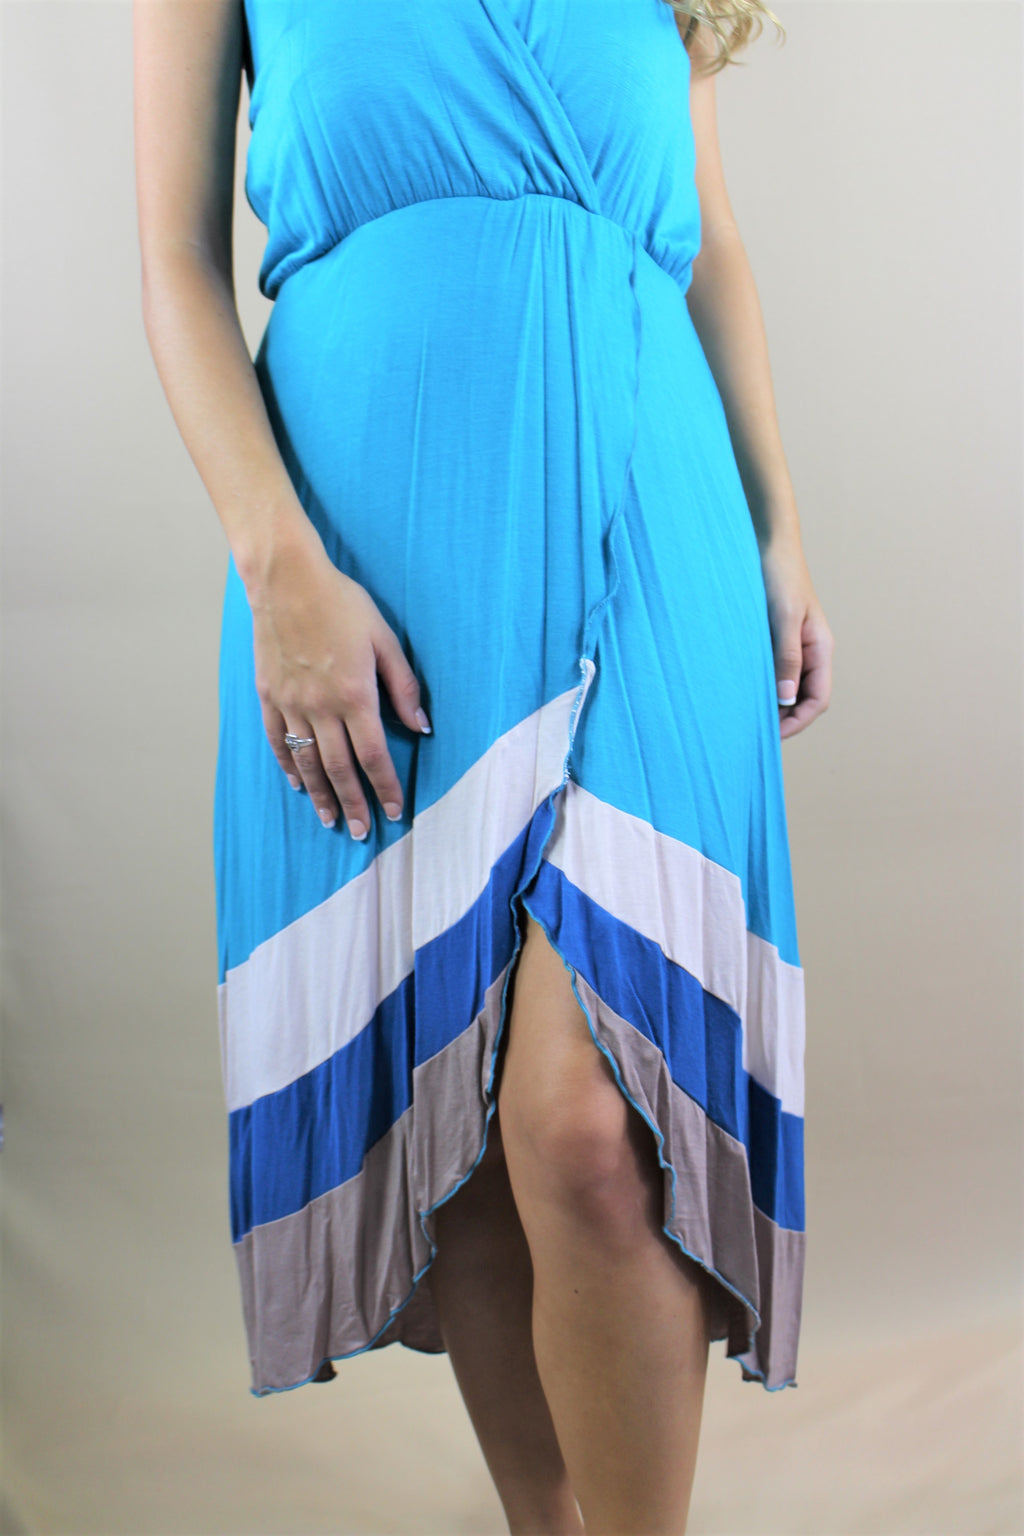 This open back halter dress comes in a blue stripe design and is constructed of 92% rayon and 8% spandex. The flowy design is perfect for your boutique.